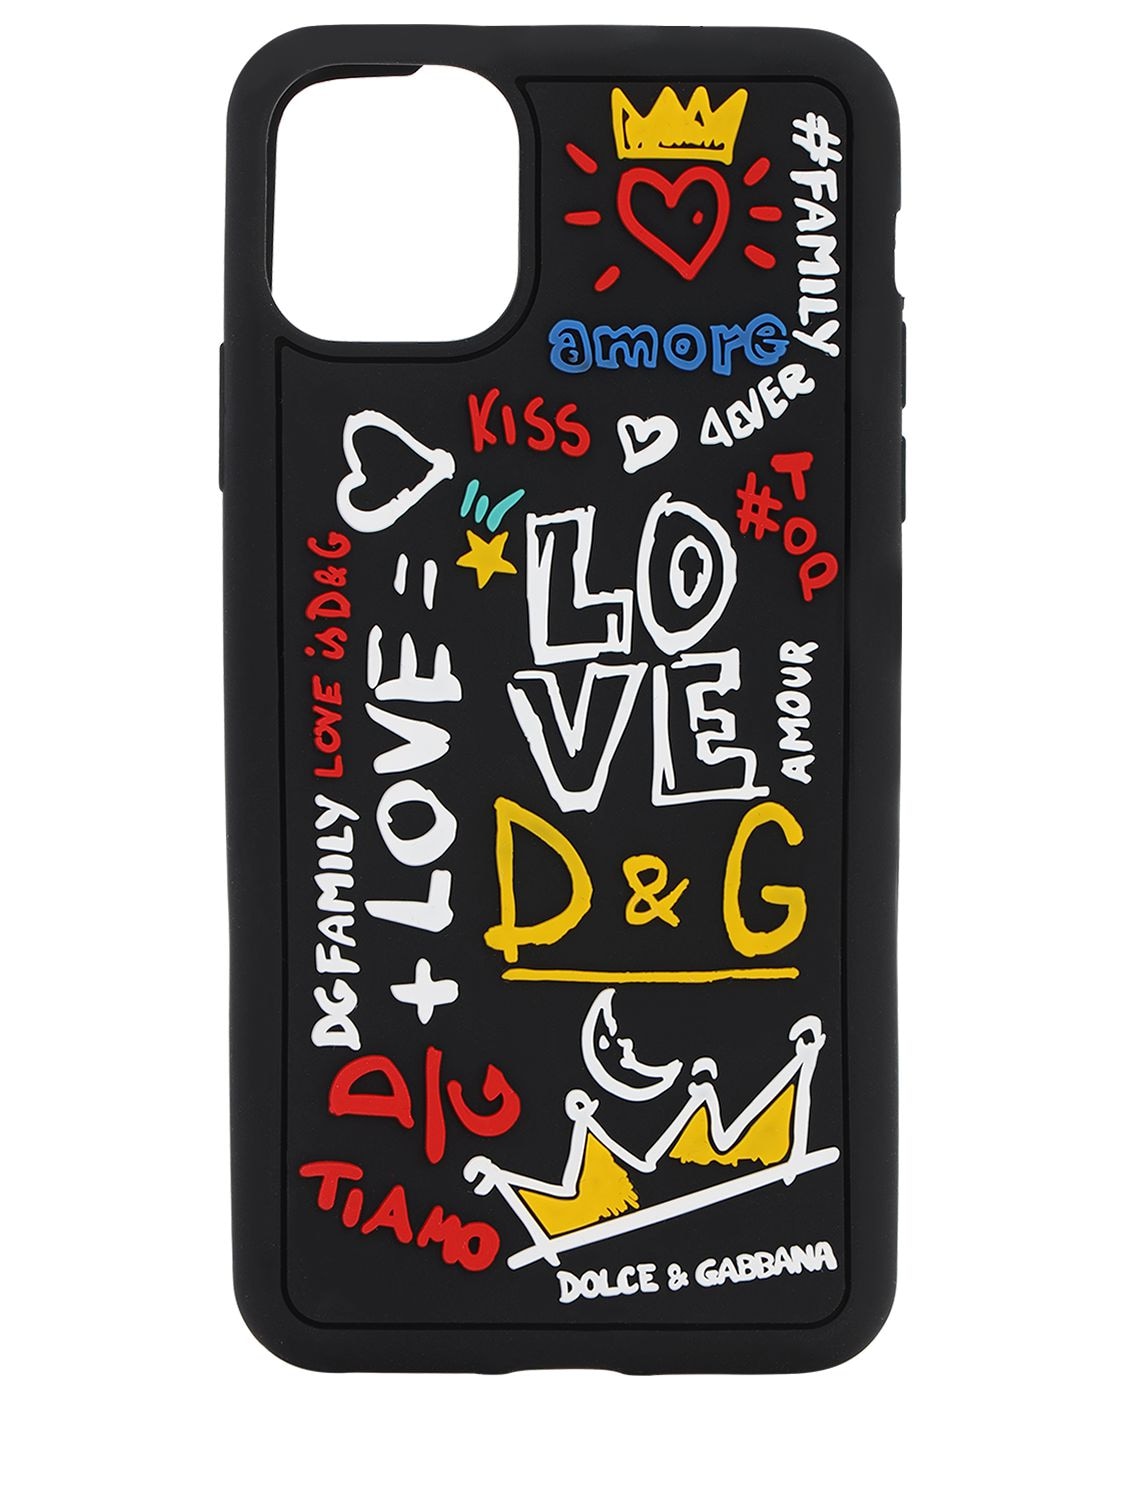 Dolce & Gabbana Writing Silicon Iphone 11 Pro Max Cover In Black